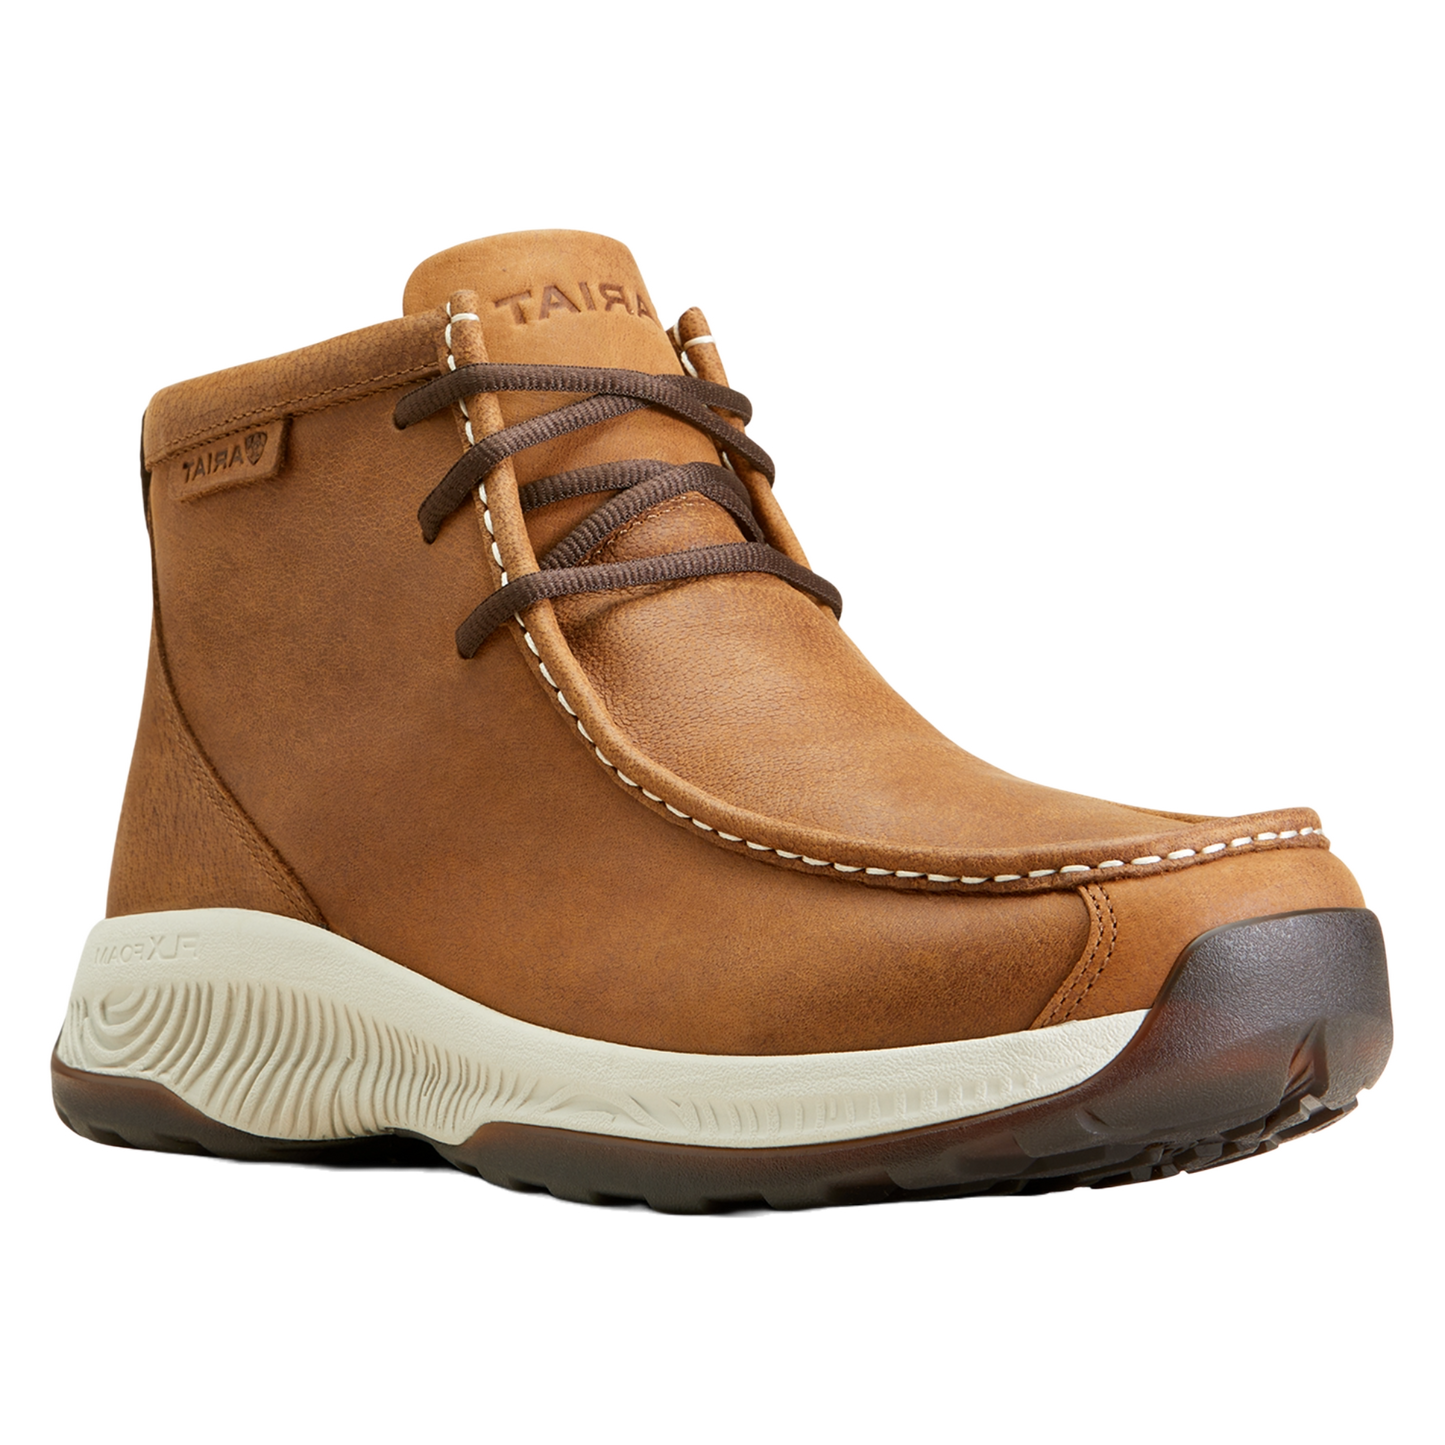 Ariat Men's Spitfire All Terrain Toasty Tan Casual Shoes 10046959